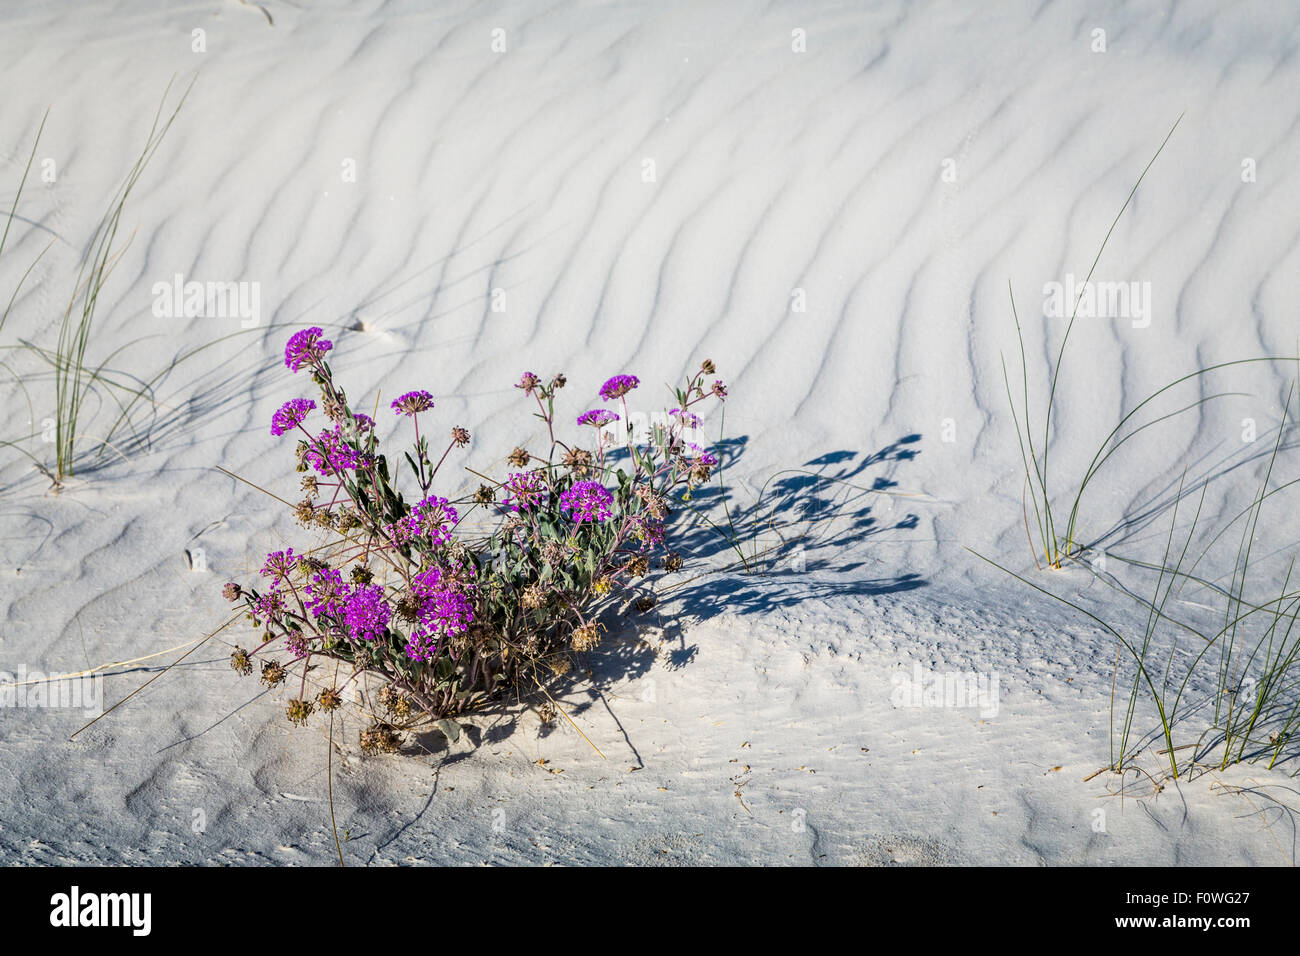 A purple sand verbena plant blooming in the gypsum dunes of the White sands National Monument near Alamogordo, New Mexico, USA. Stock Photo